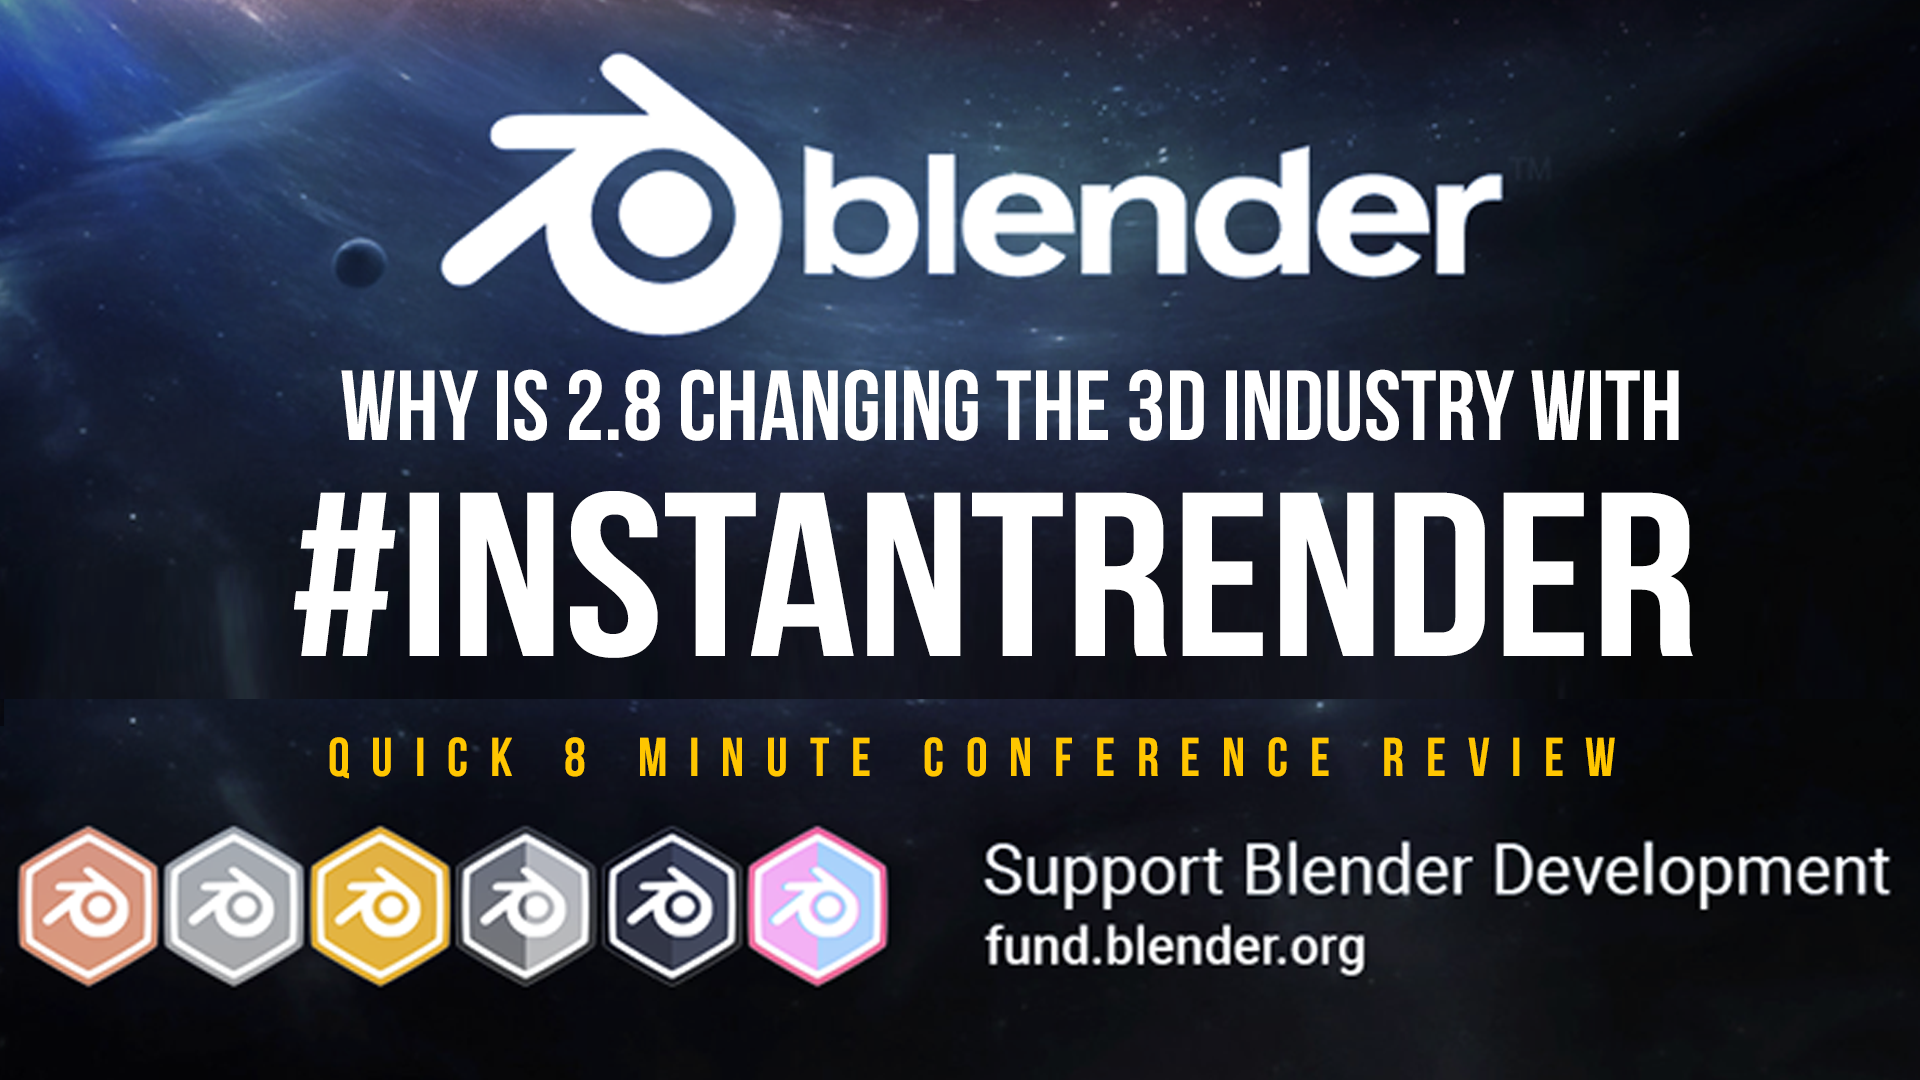 Blender 2.8 is changing the 3D industry